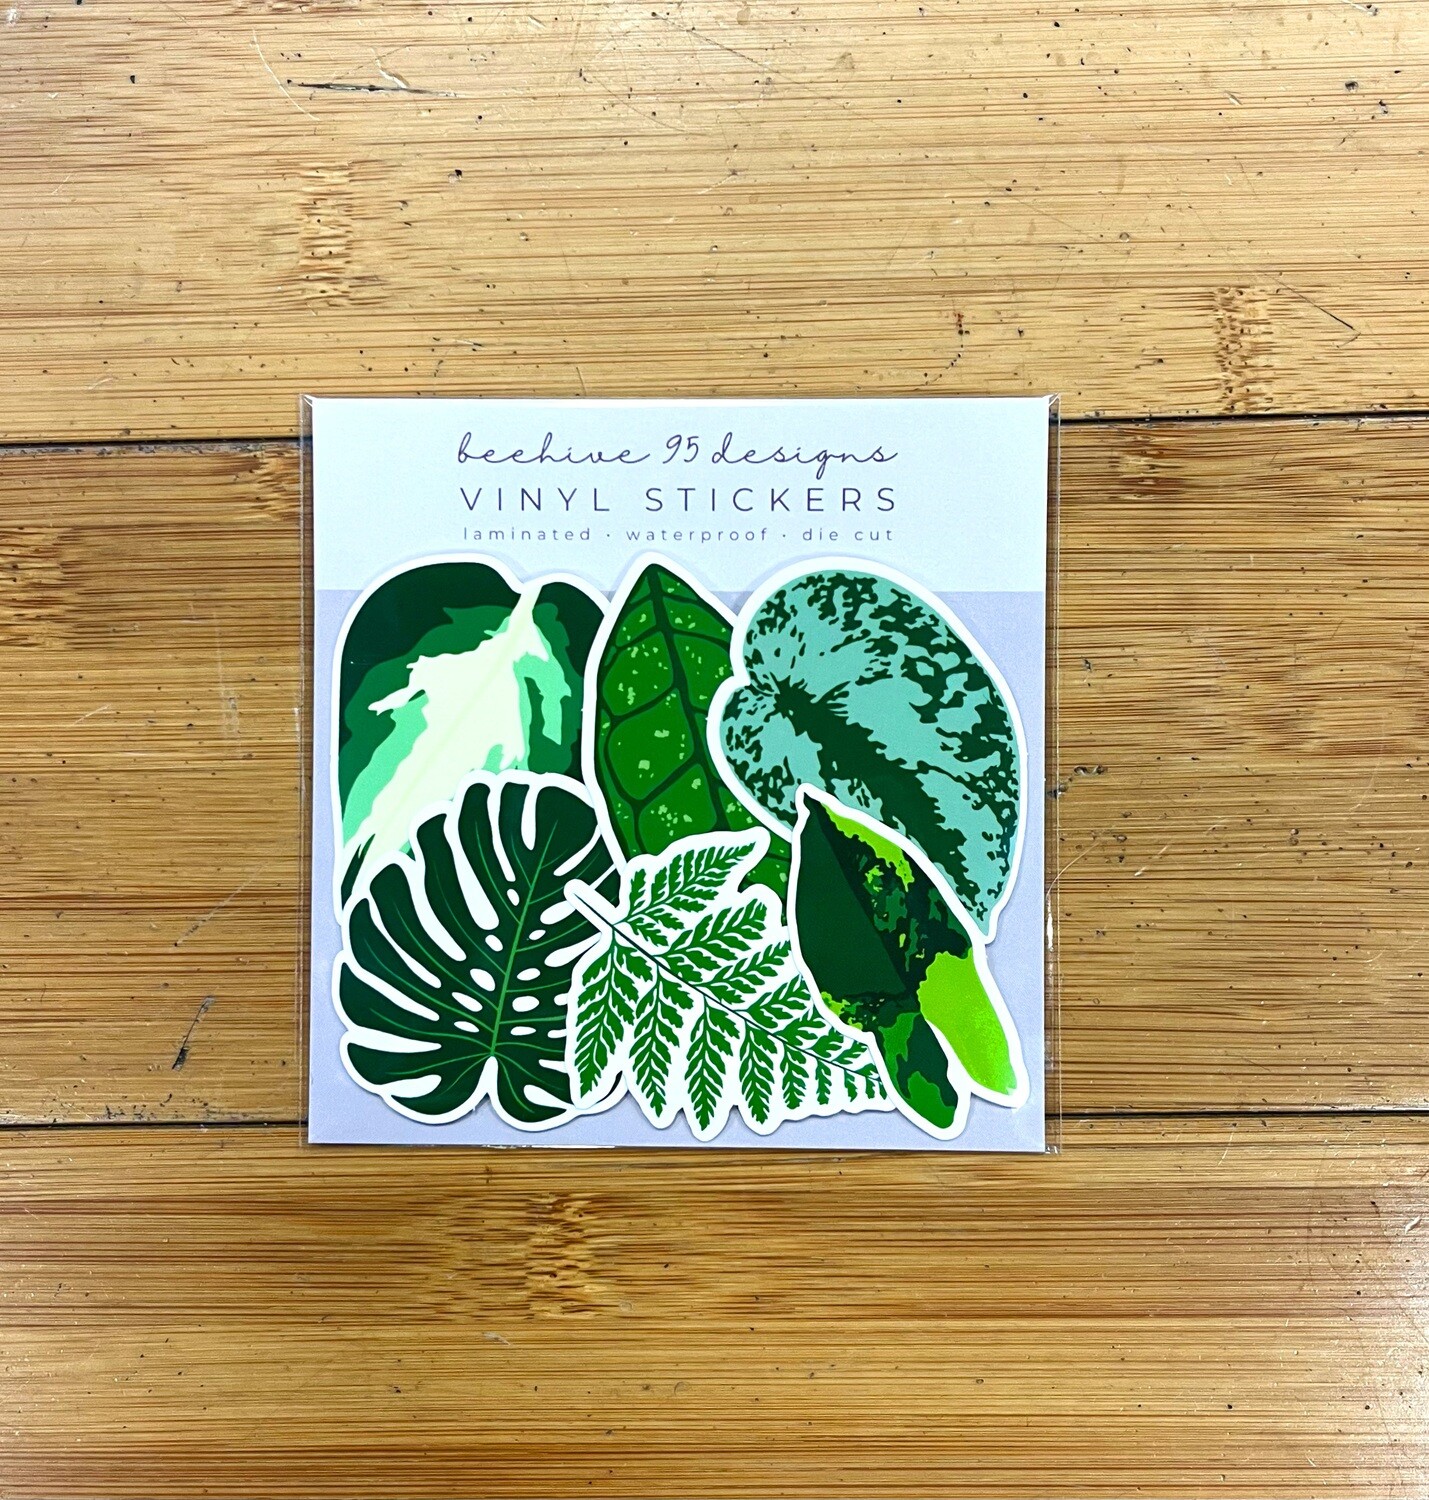 Houseplant Leaves - Sticker Pack by Beehive 95 Designs